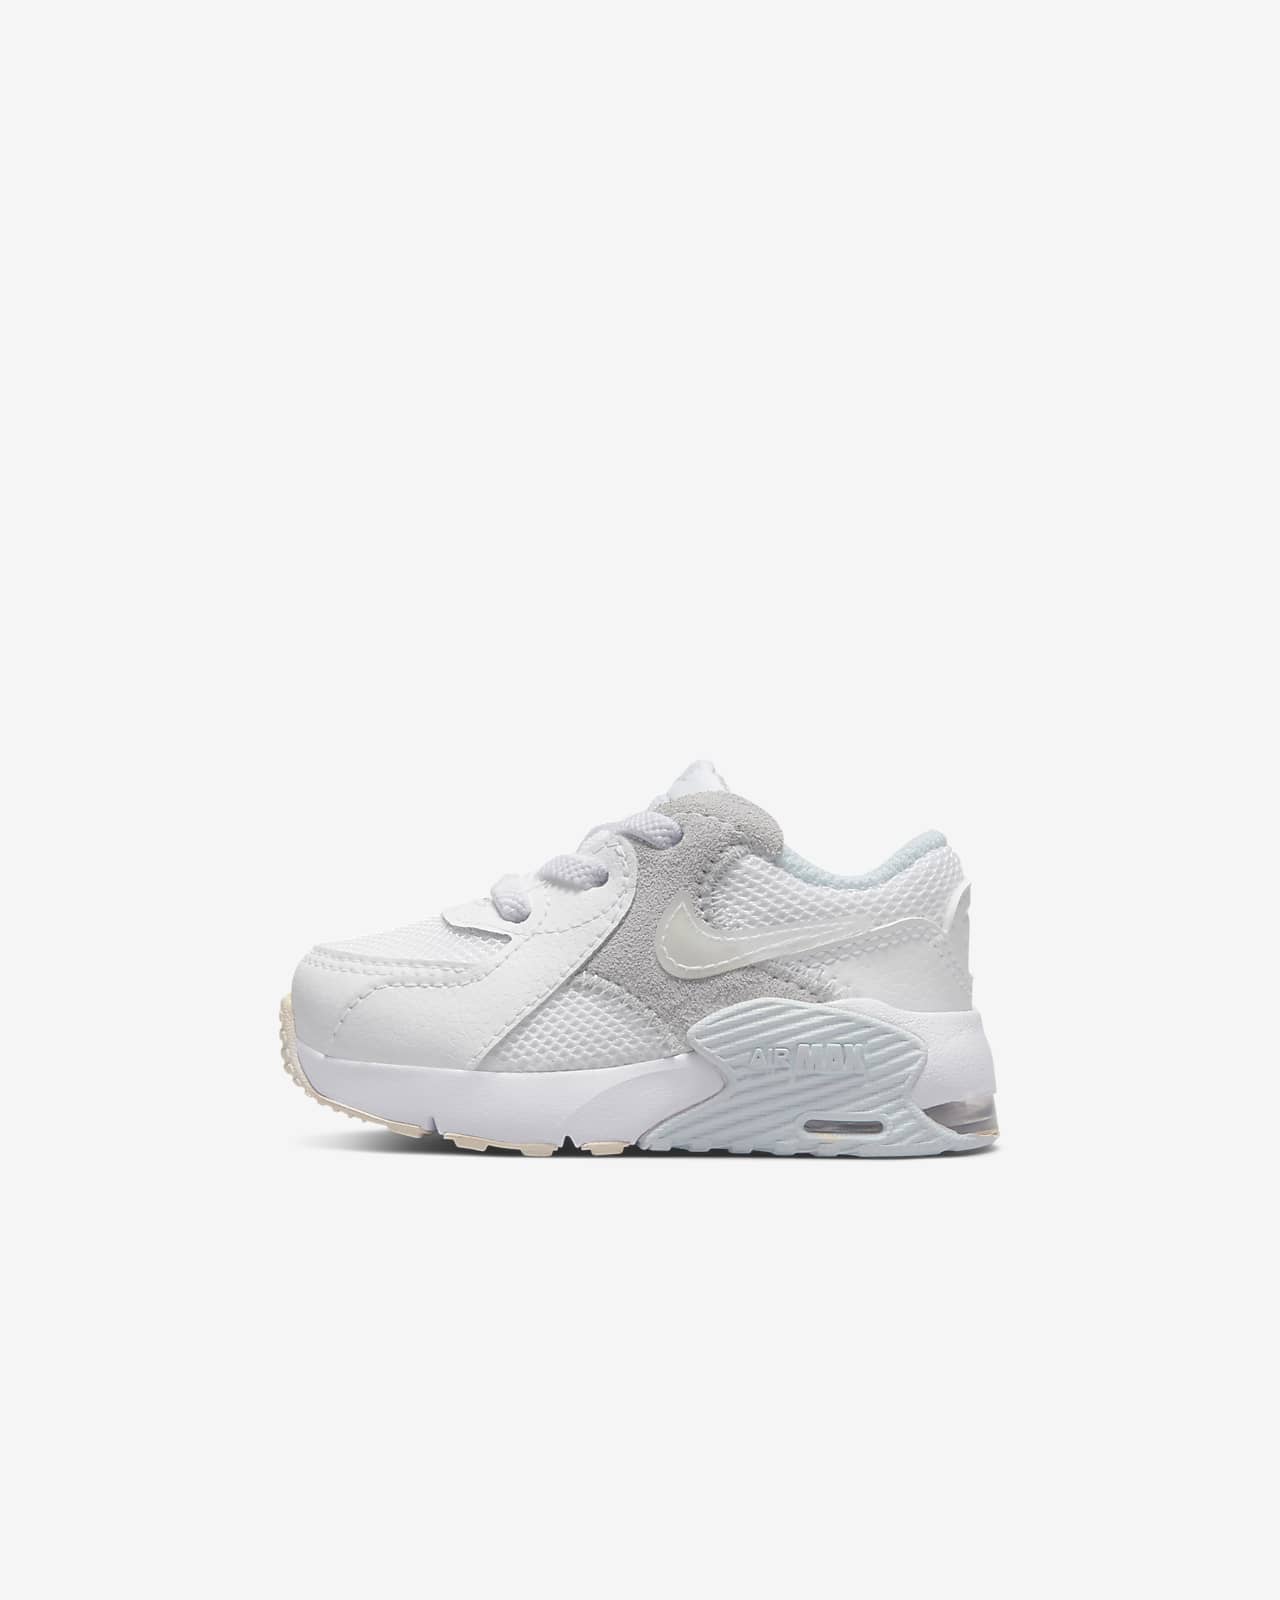 Nike Air Max Excee Baby/Toddler Shoes